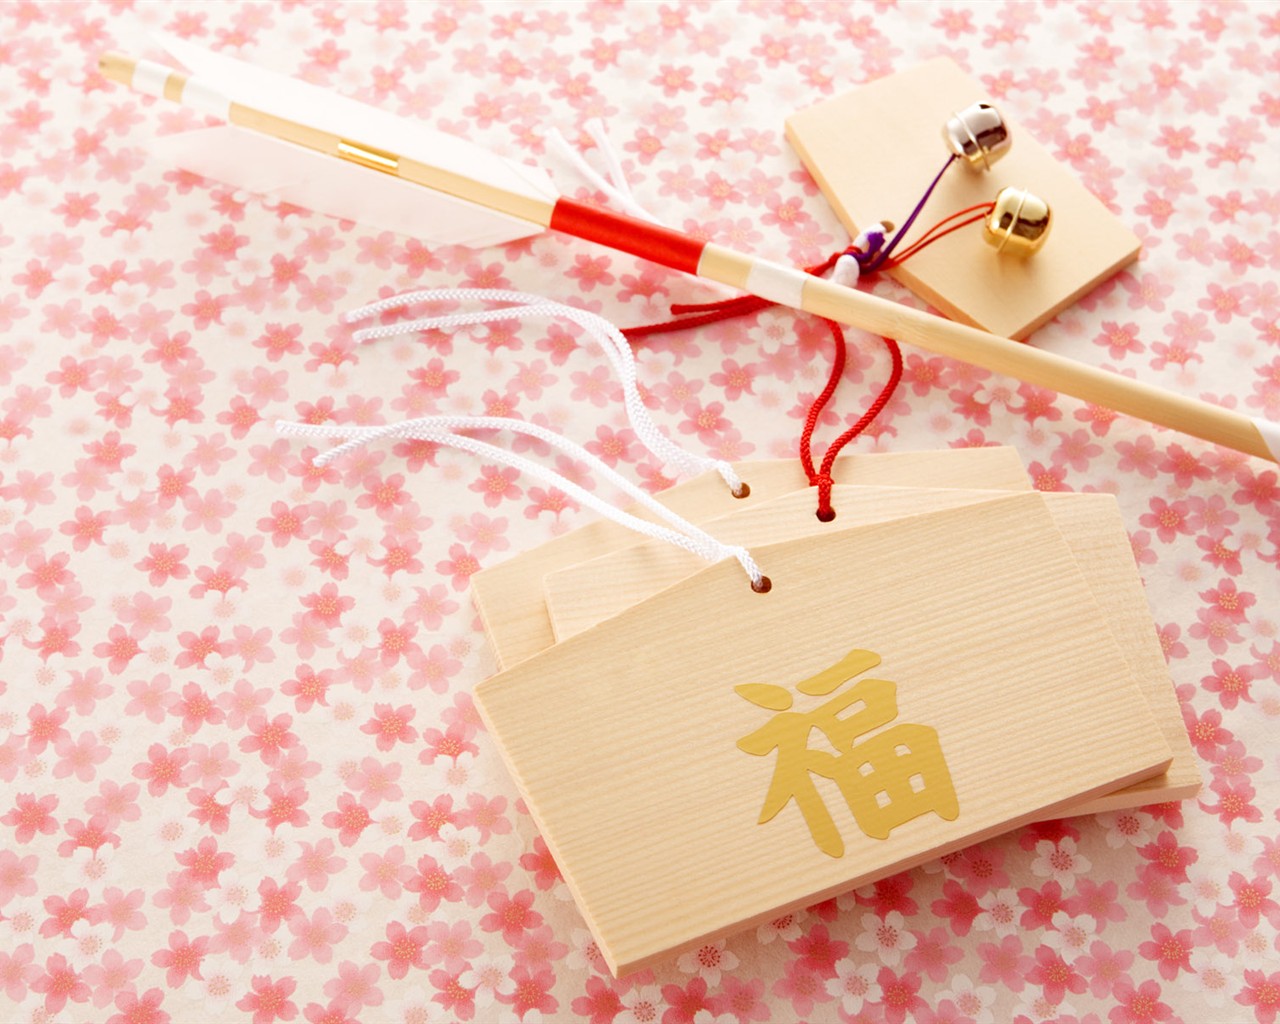 Japanese New Year Culture Wallpaper #5 - 1280x1024